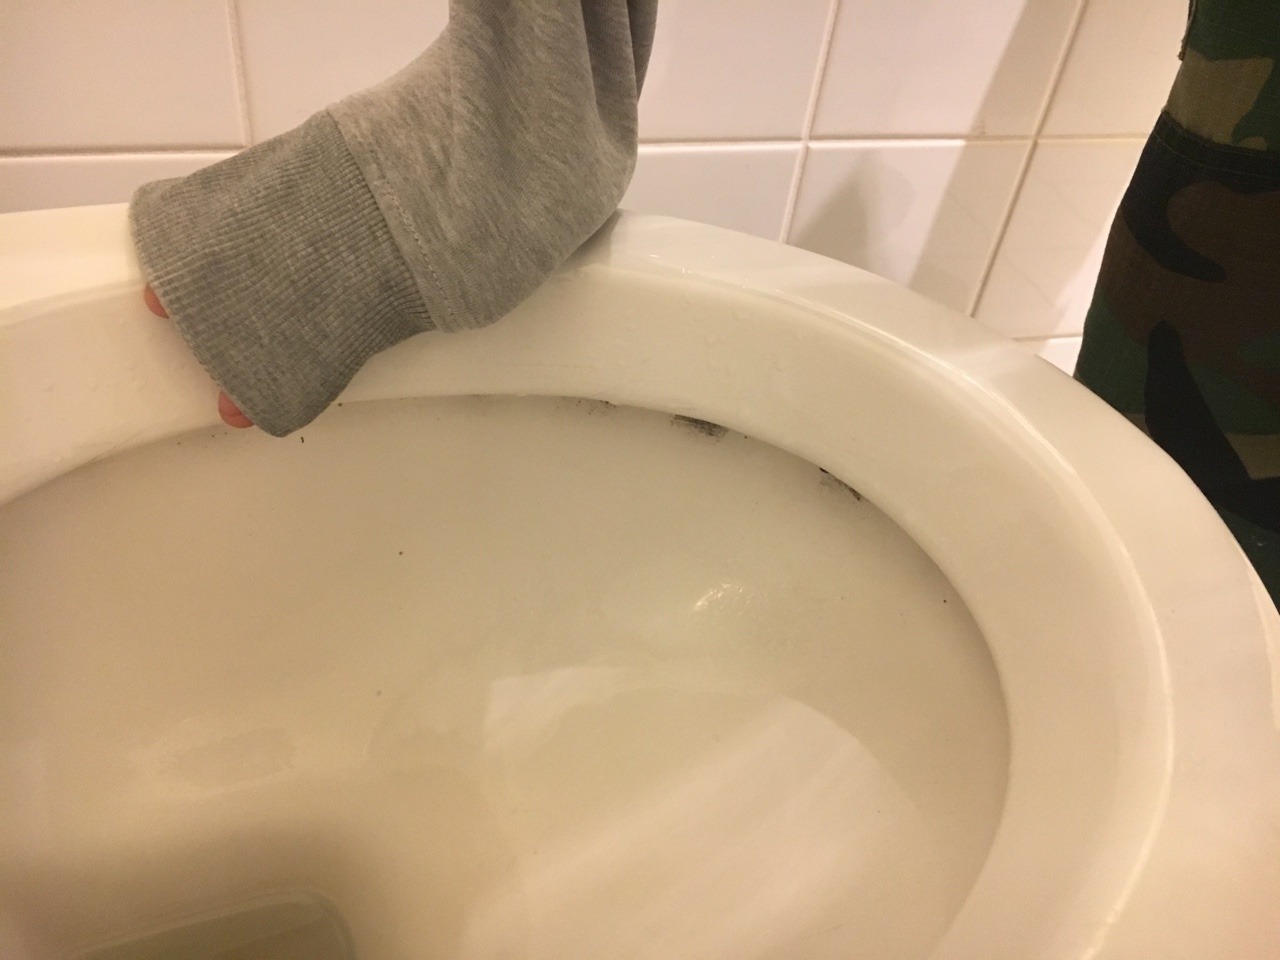 sk8erpigvienna:First order of business at work: pissing my shorts and cleaning the